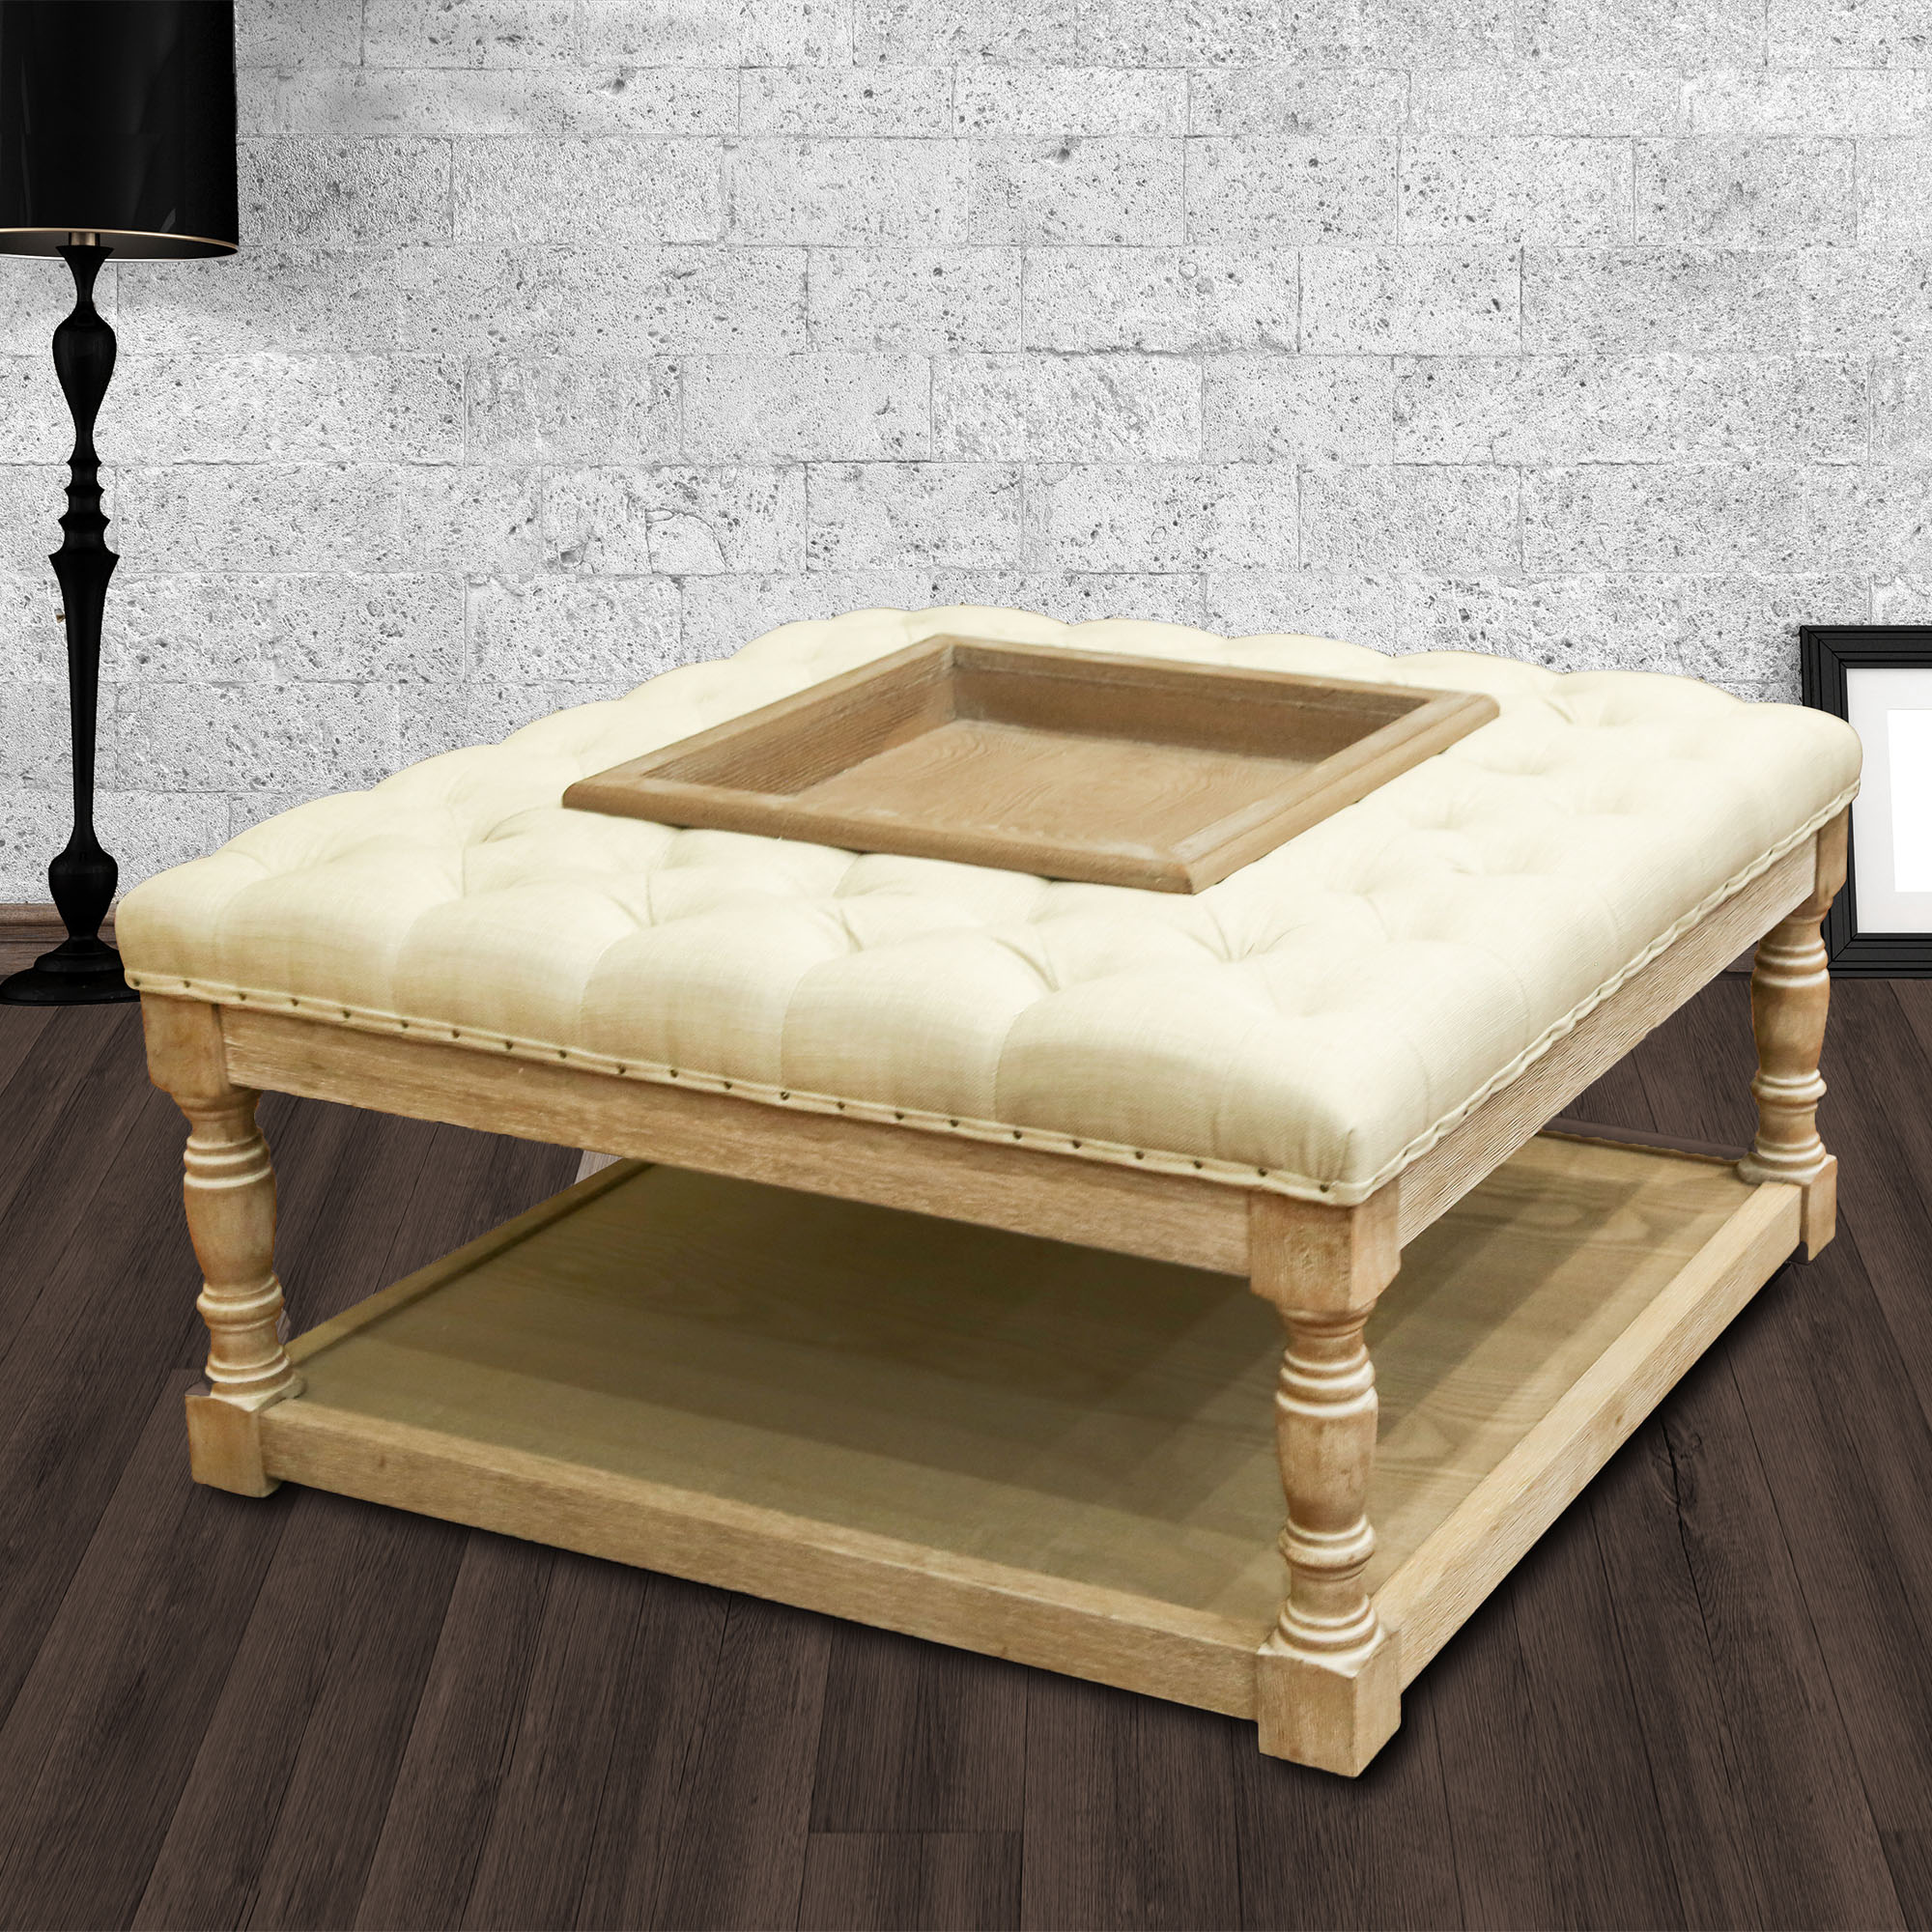 Besmore 34-inch Natural Tufted Cocktail Ottoman Recessed Center Tray